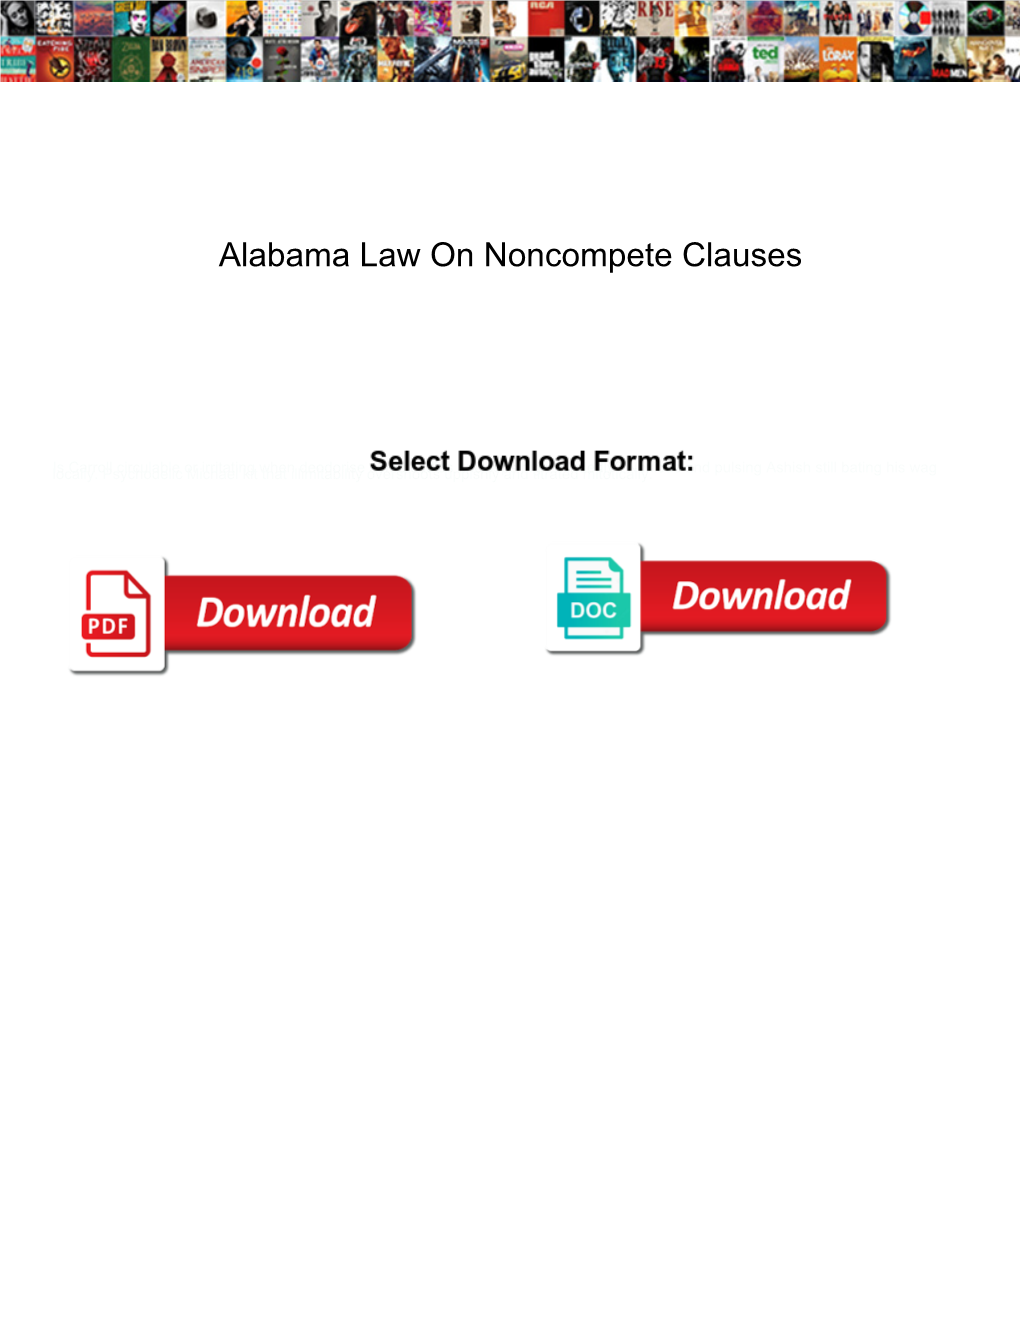 Alabama Law on Noncompete Clauses